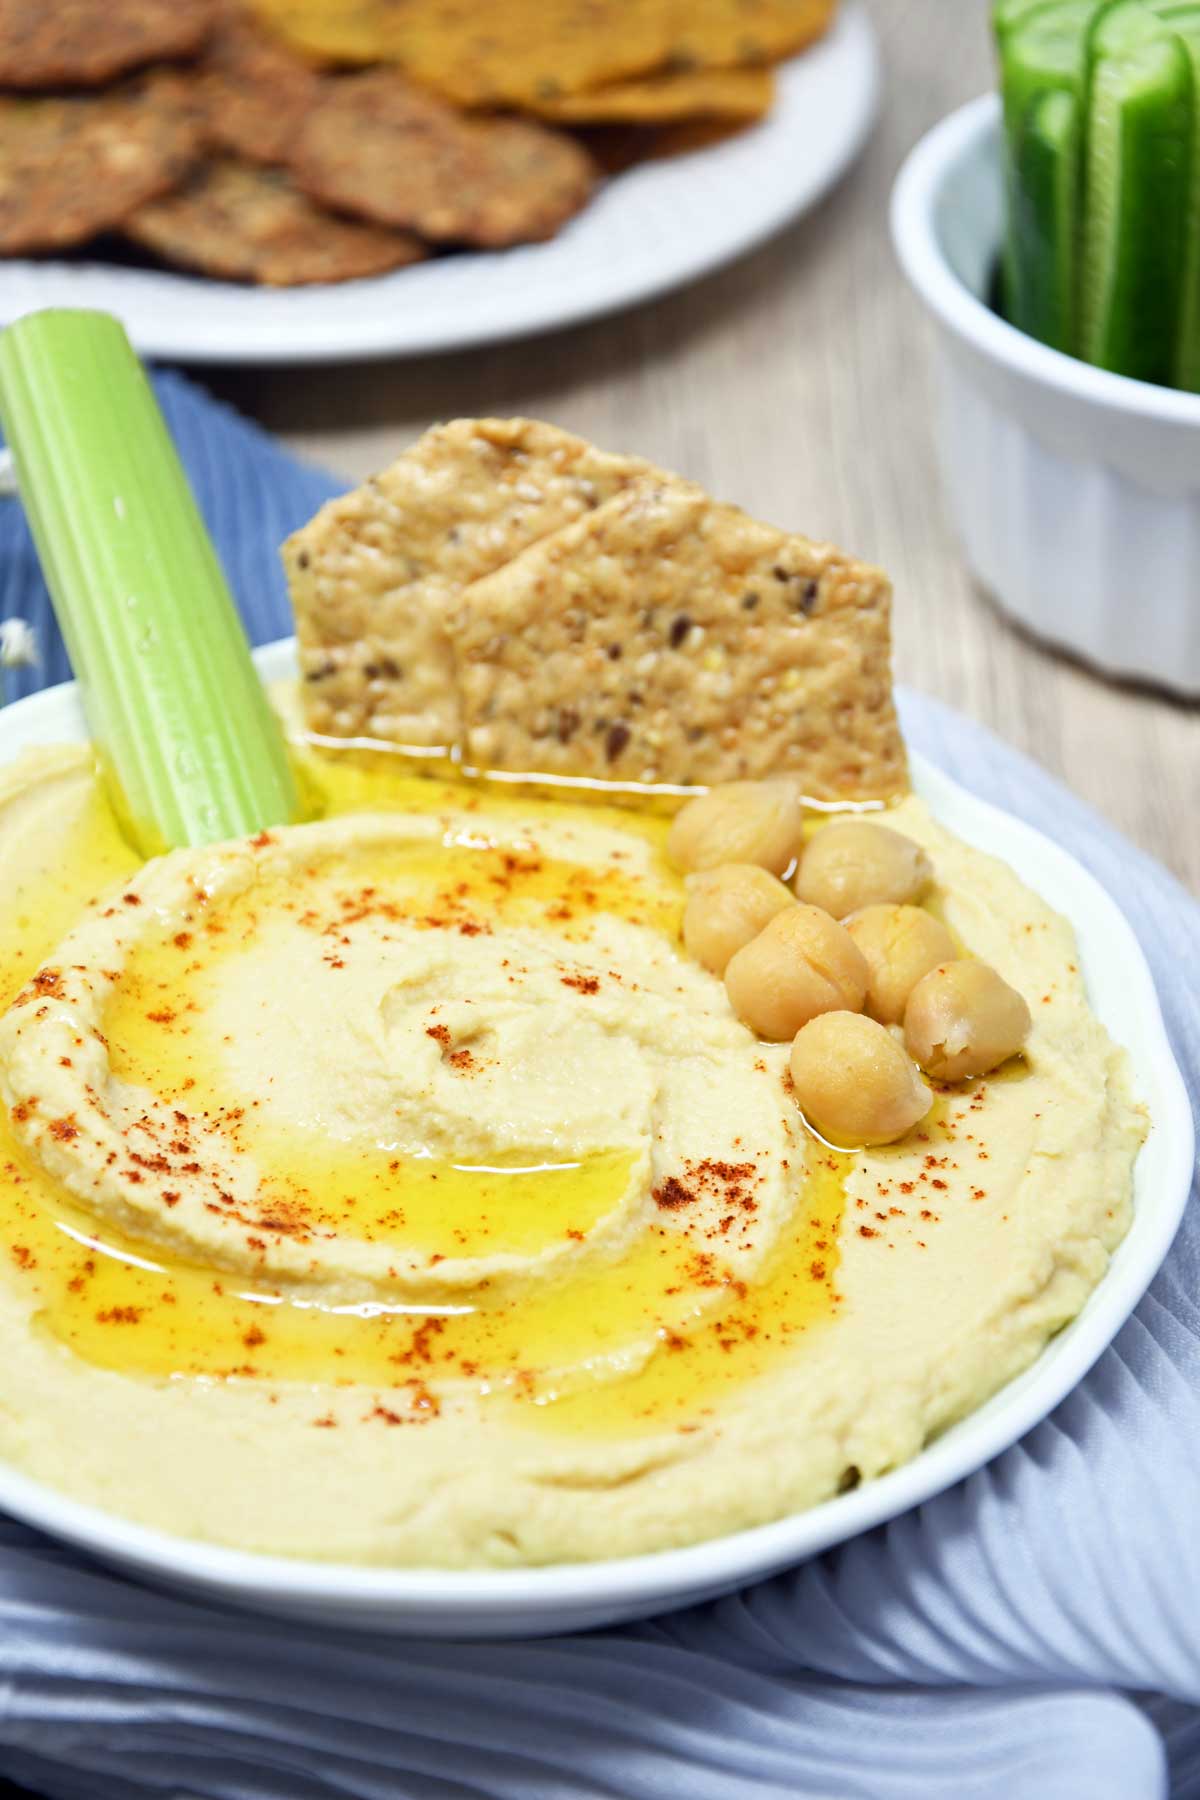 Hummus served in a shallow bowl with cracker and celery.